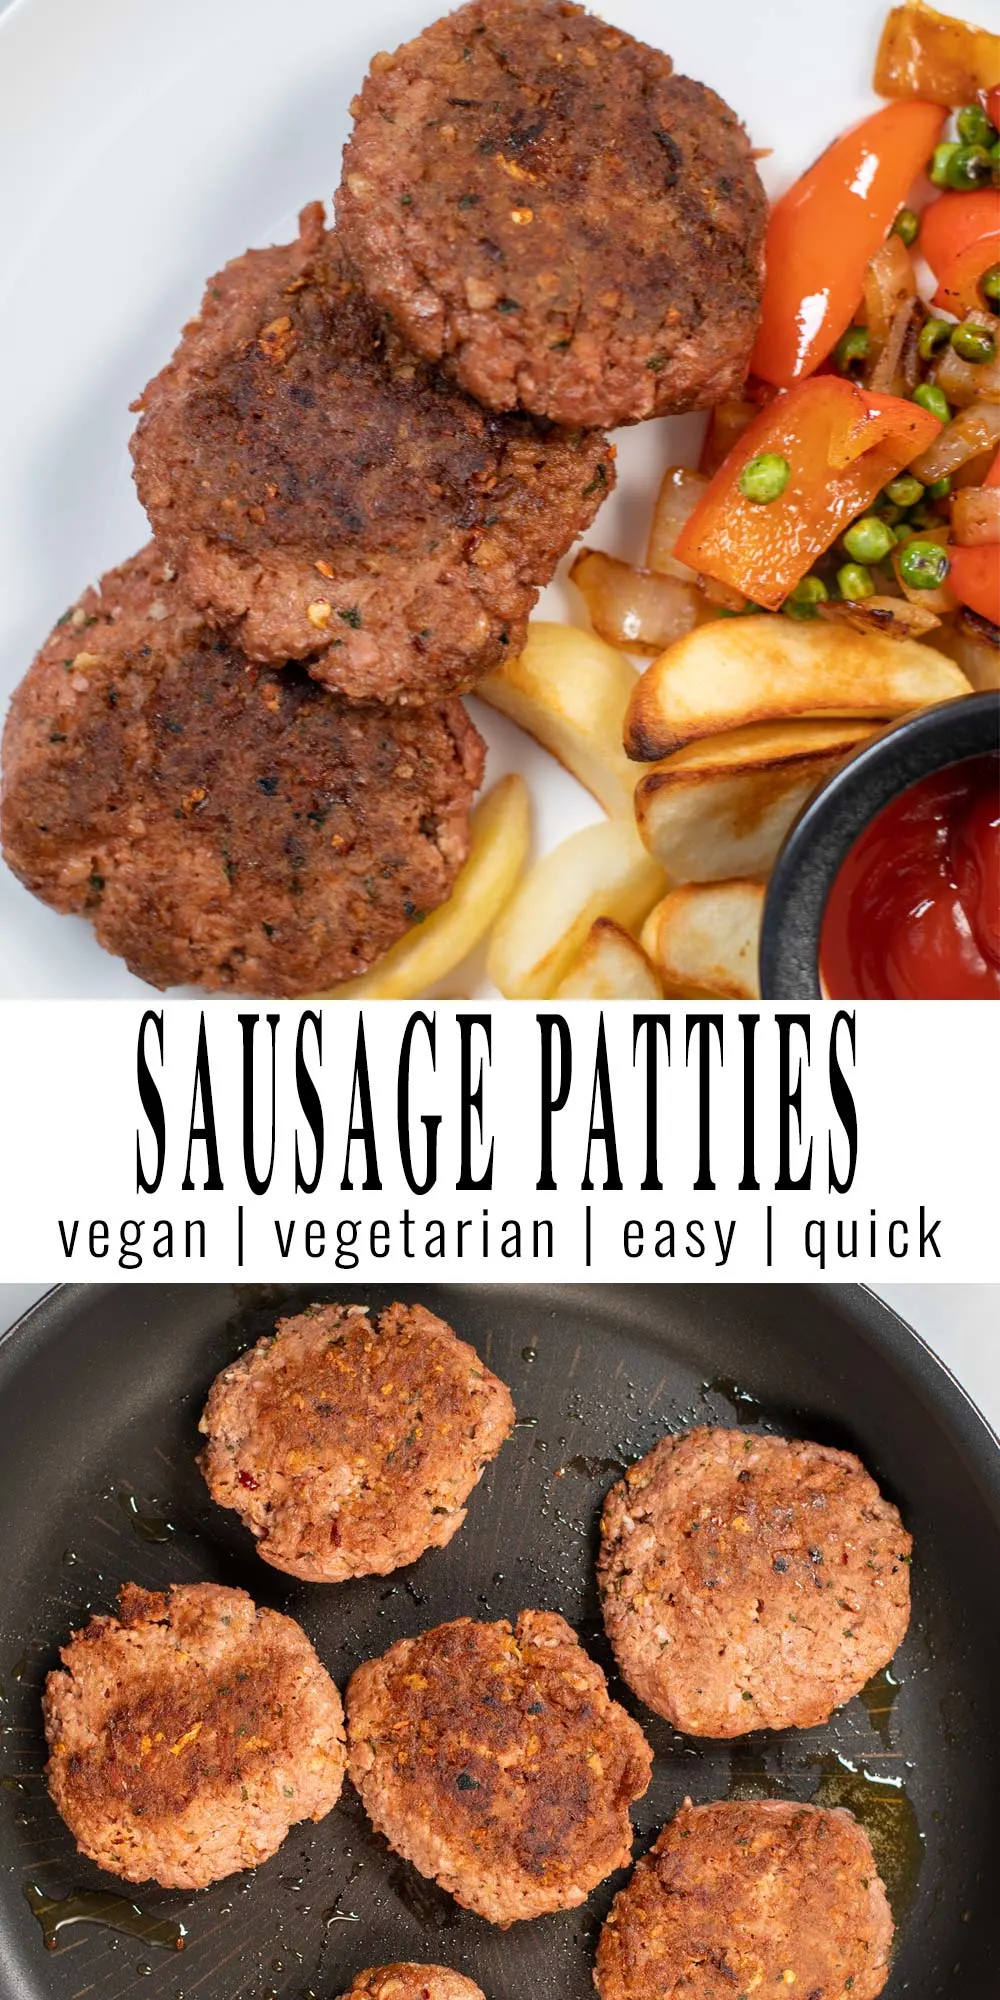 Collage of two pictures of Sausage Patties with recipe title text.